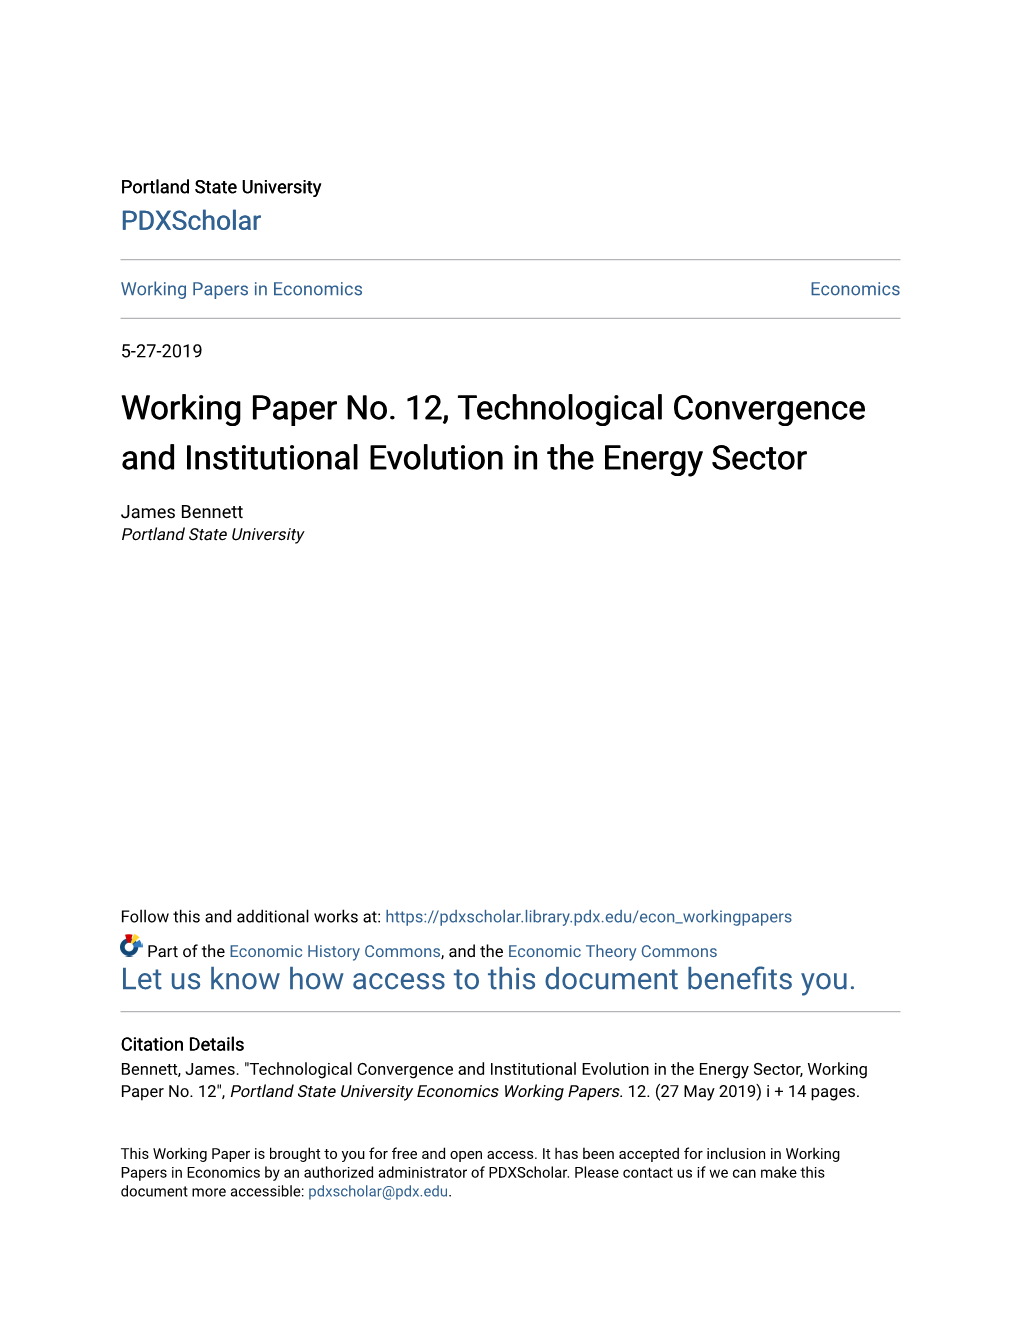 Working Paper No. 12, Technological Convergence and Institutional Evolution in the Energy Sector